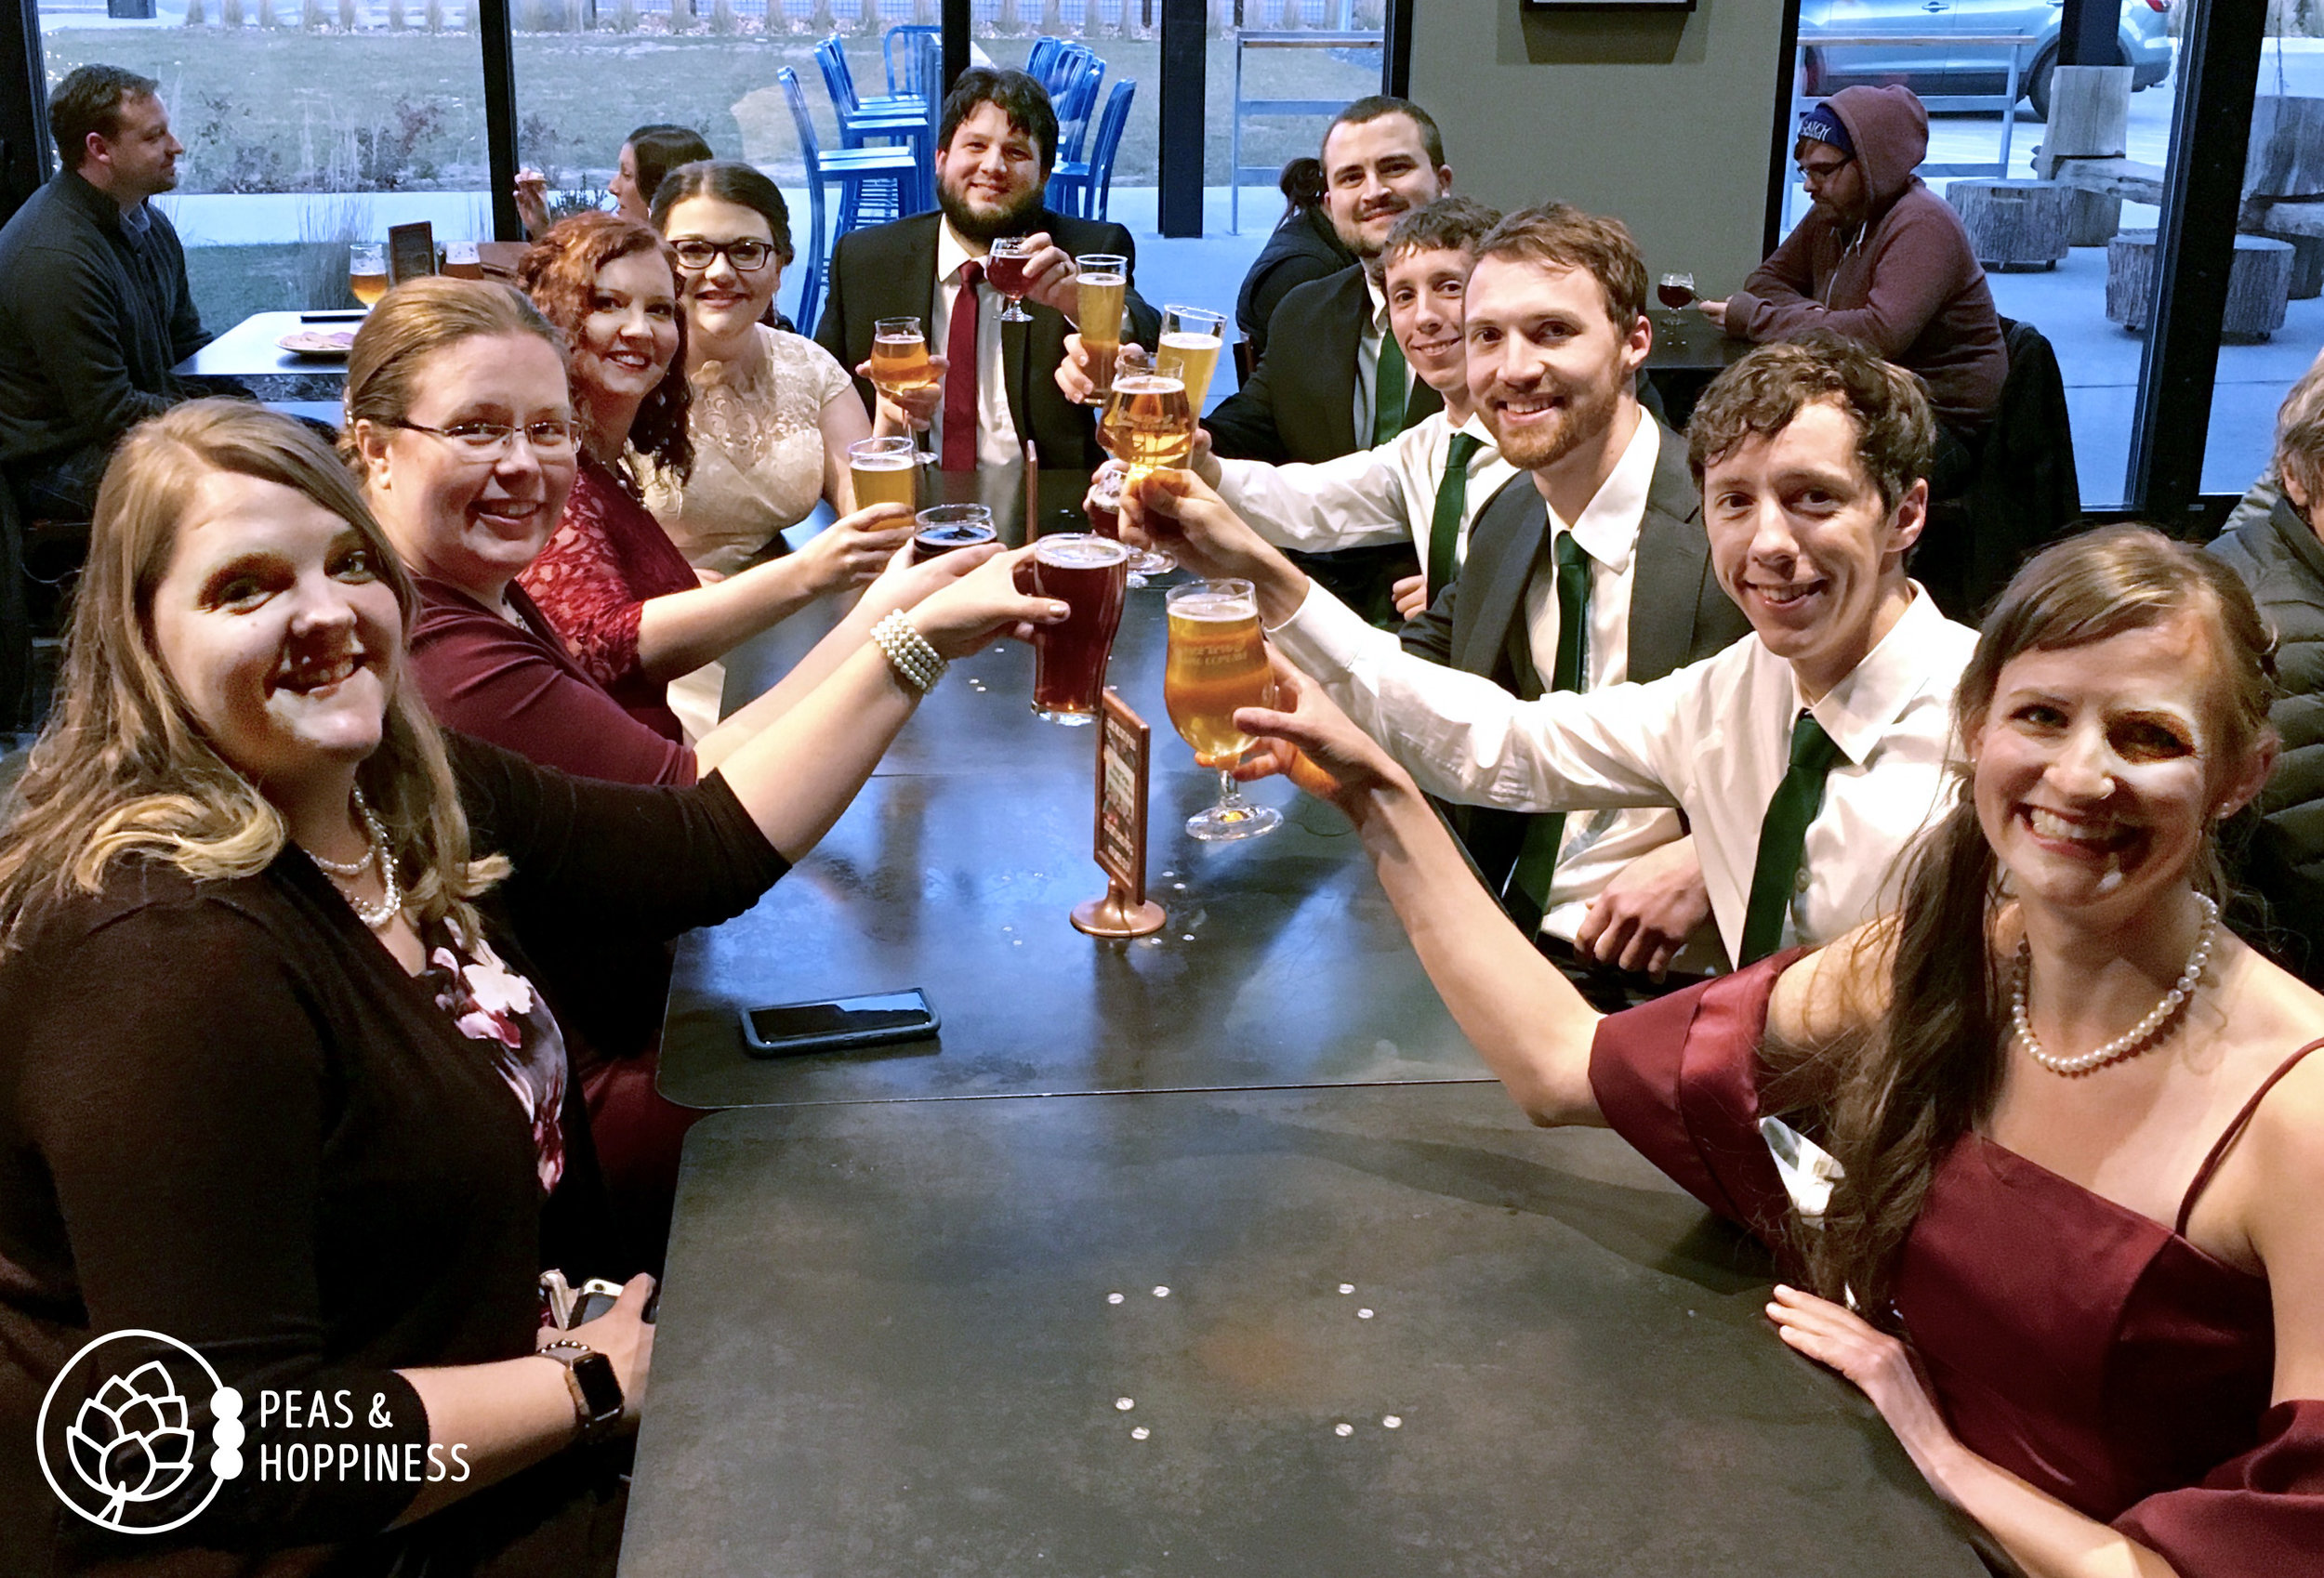 Post-wedding, pre-reception beer for the bridal party at my brother's wedding! &lt;3